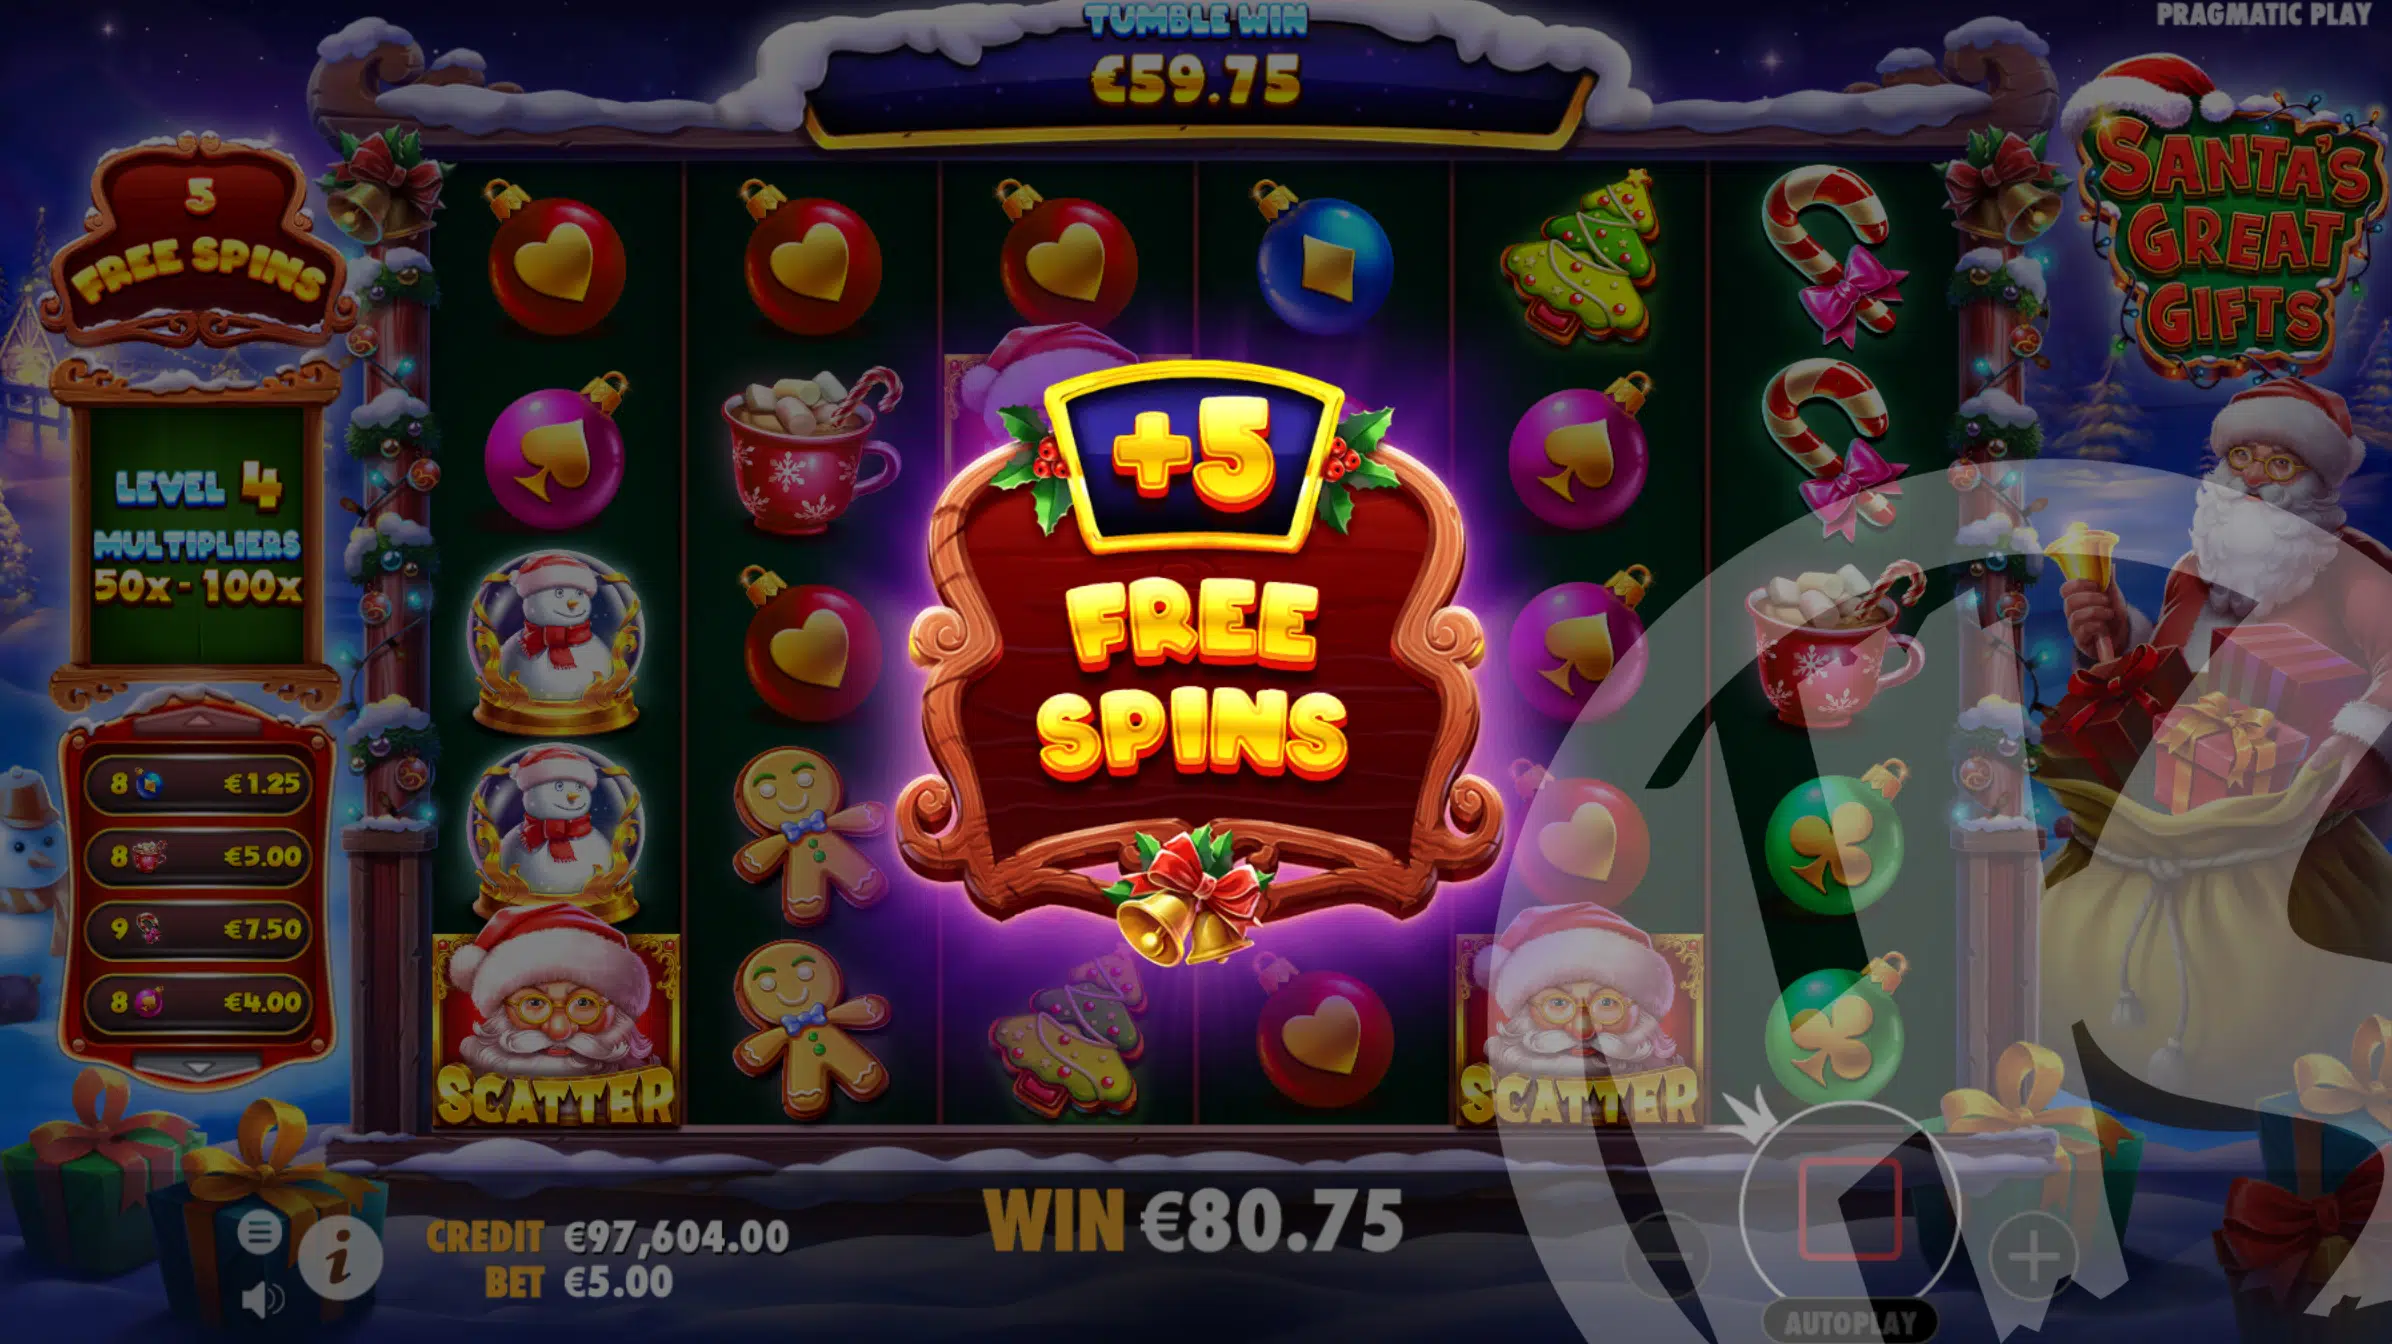 Land 3 or More Scatters During Free Spins to Trigger an Additional +5 Spins